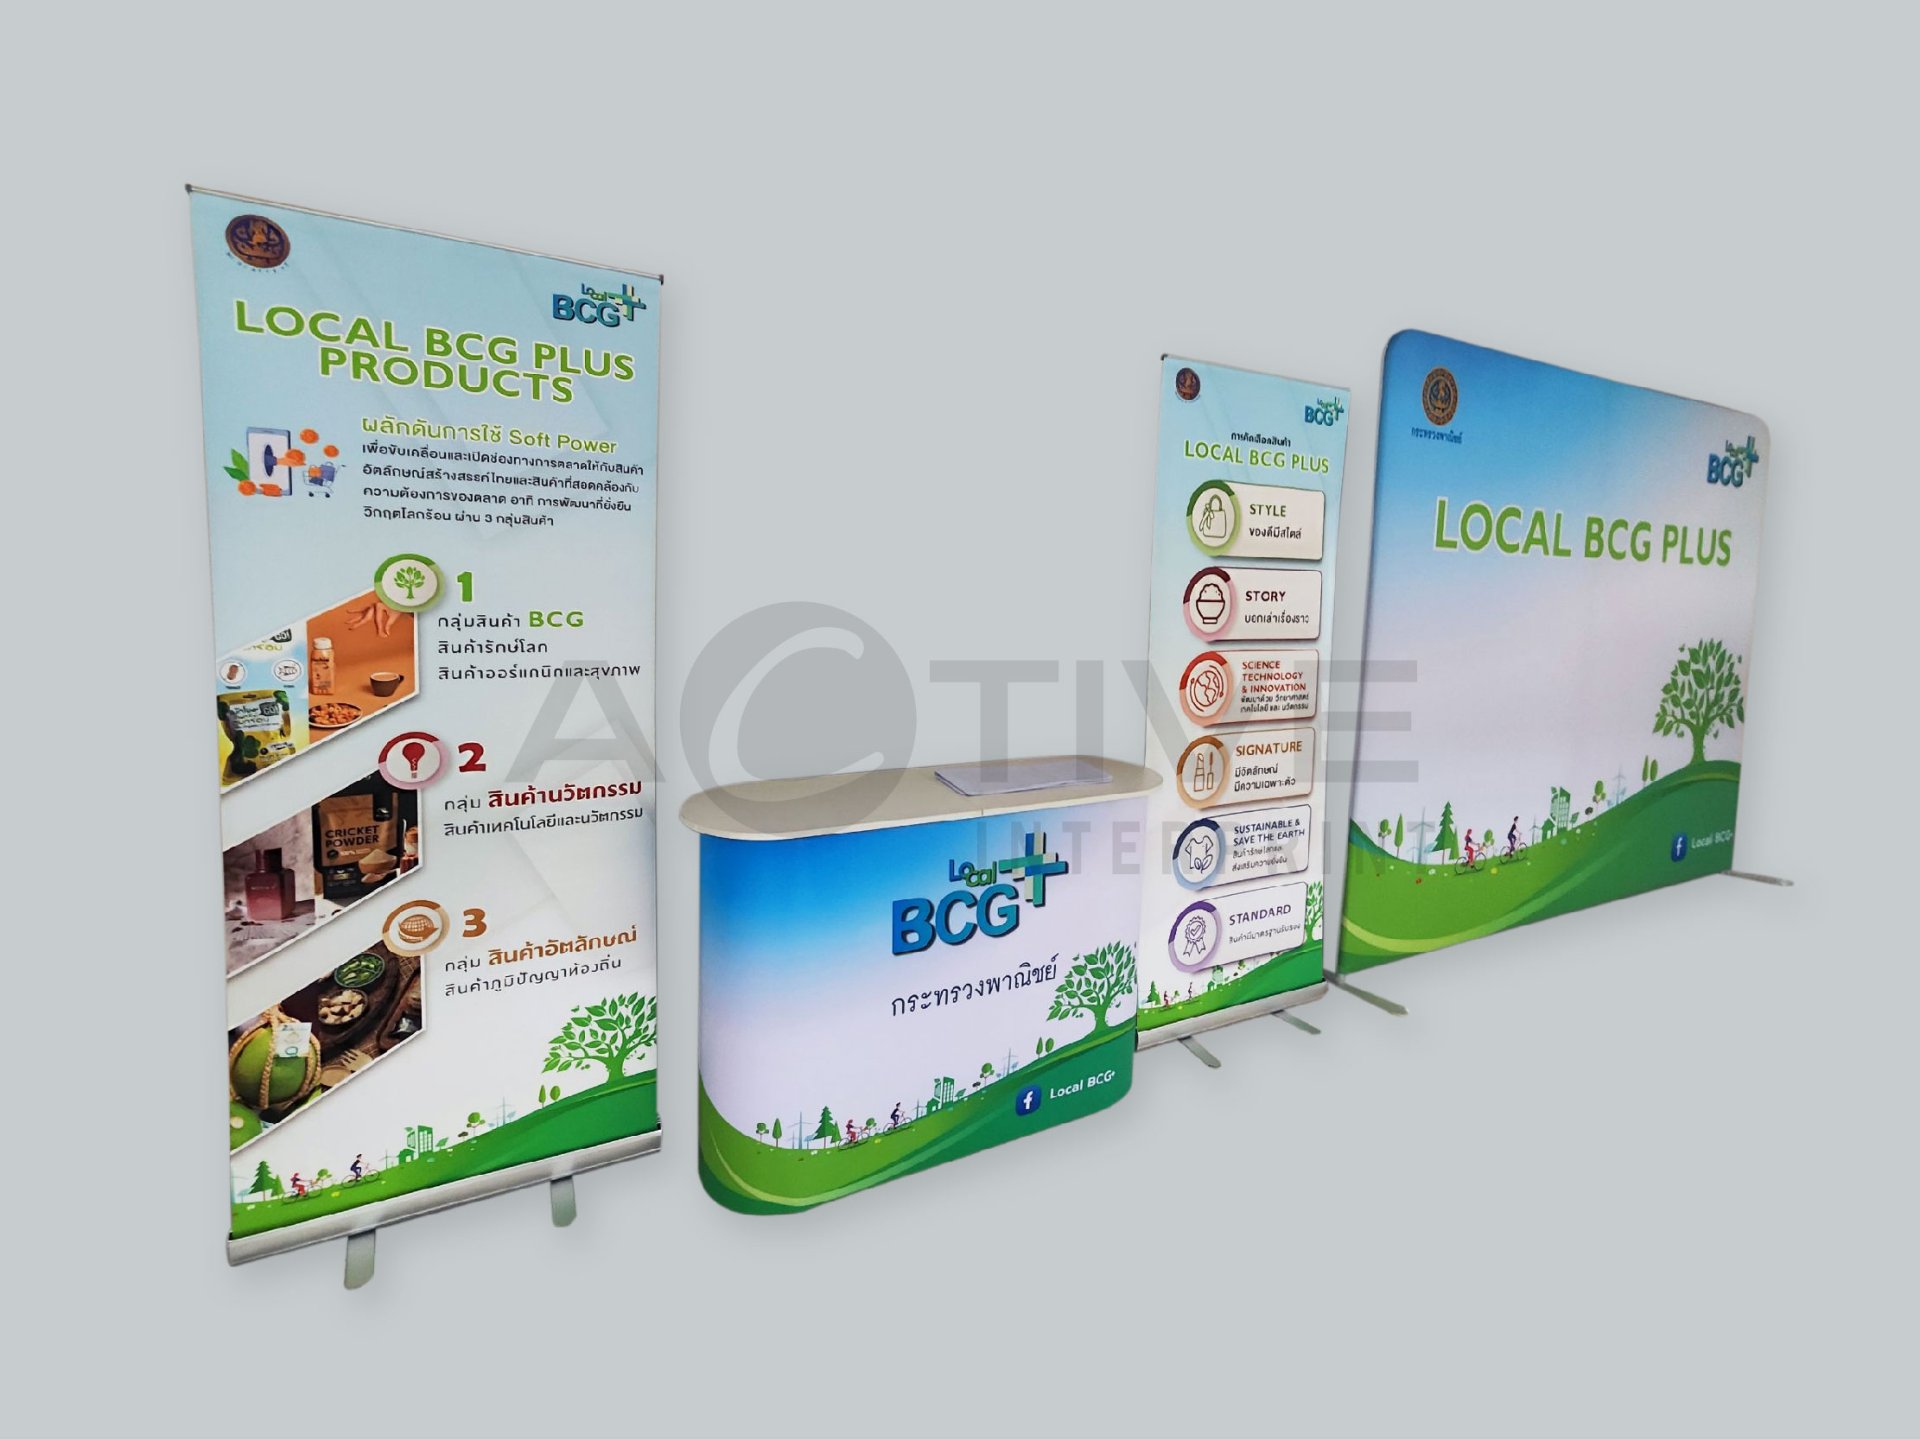 Pull Frame - Roll Up - X-Banner - Standee - J-Flag